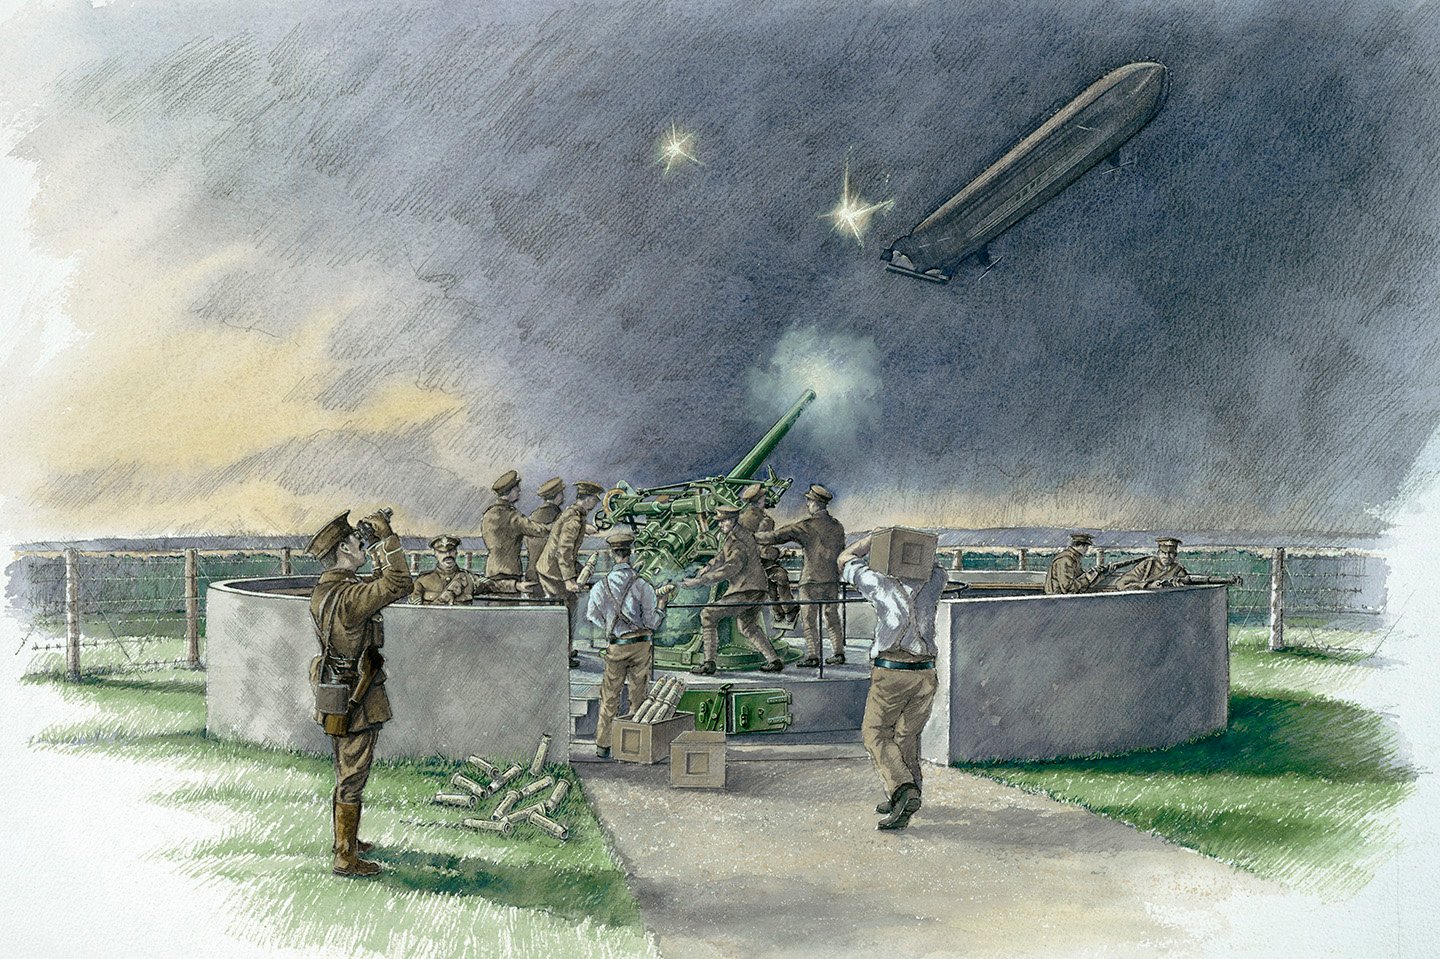 Lodge Hill, Chatham, Kent, reconstruction drawing by Peter Dunn of the First World War anti-aircraft site with gunner firing at a German Zeppelin airship